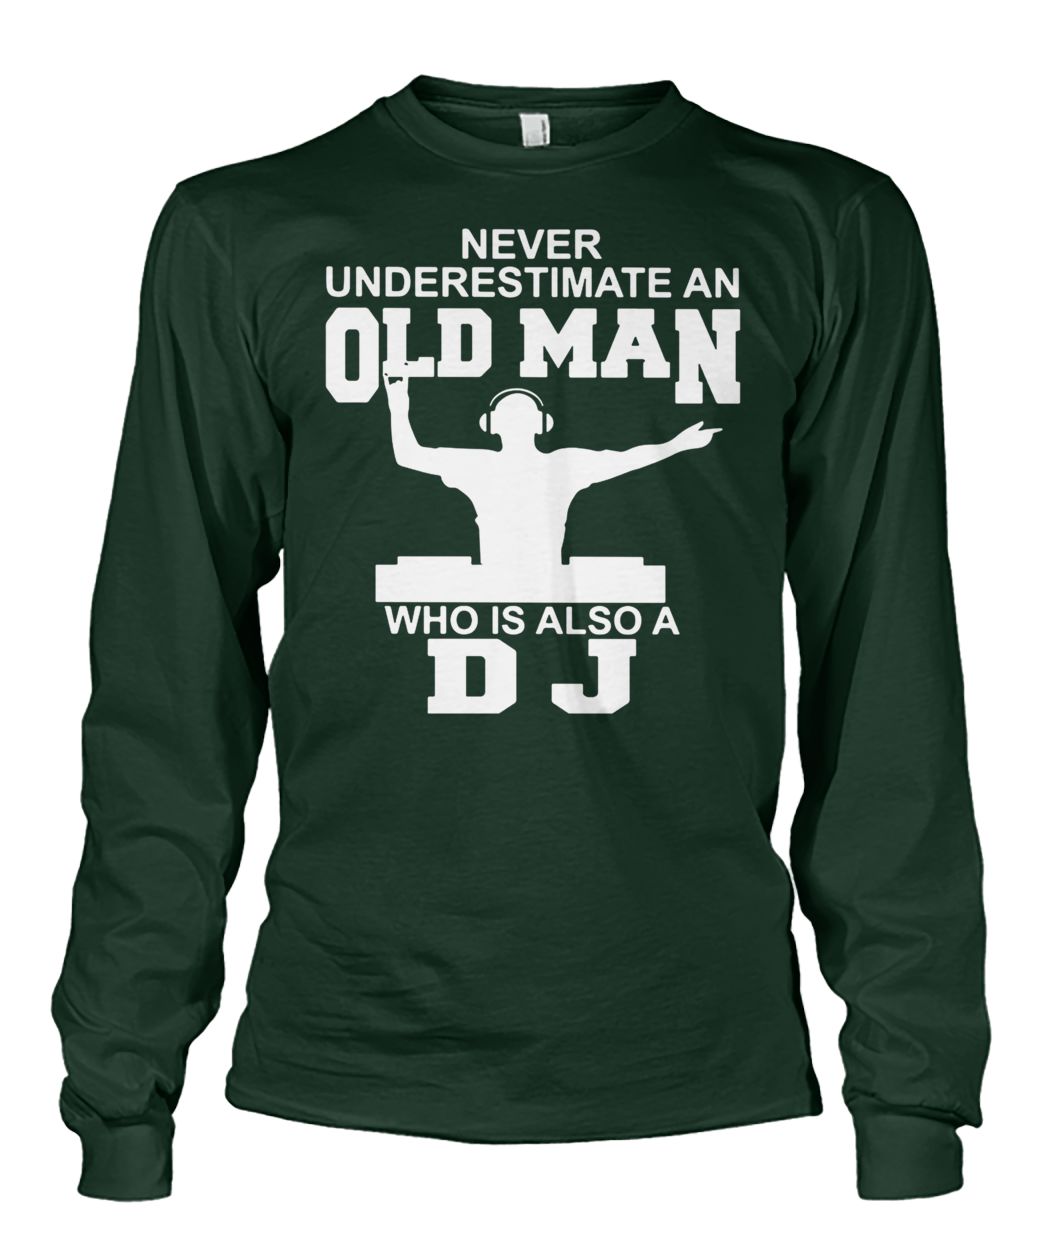 Never underestimate an old man who is also a DJ unisex long sleeve